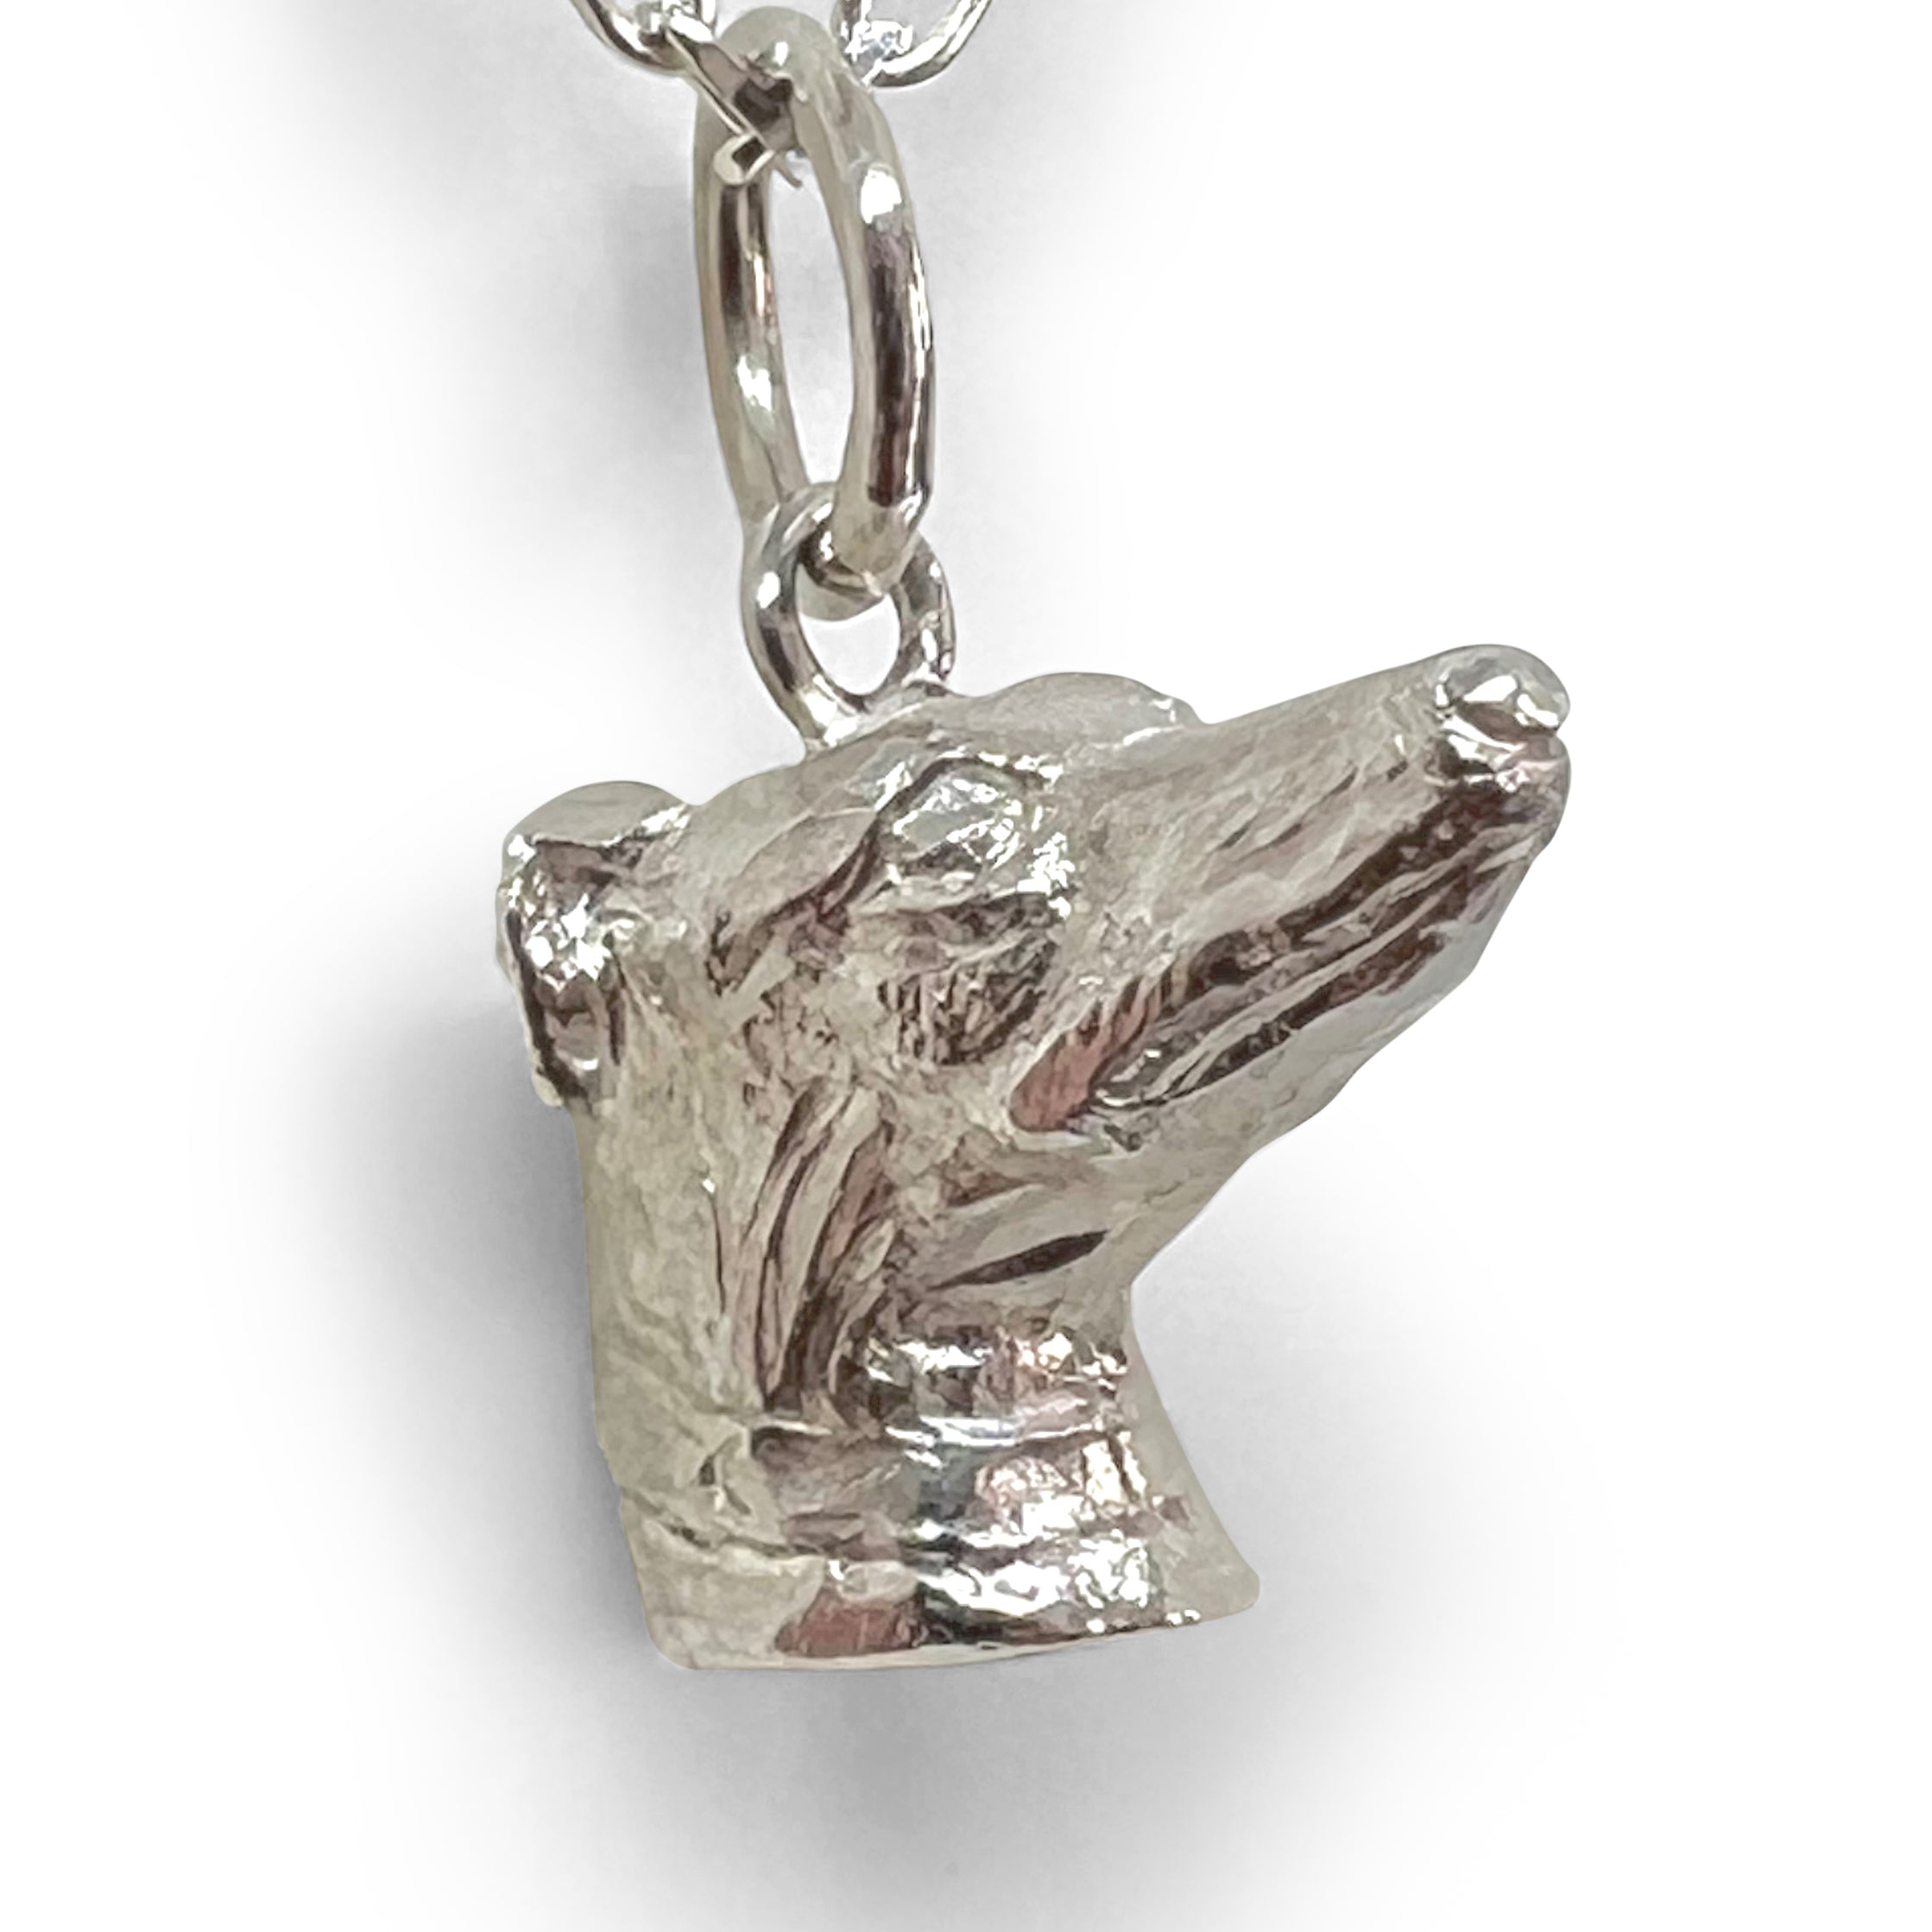 Greyhound Pendant  or charm by Paul Eaton